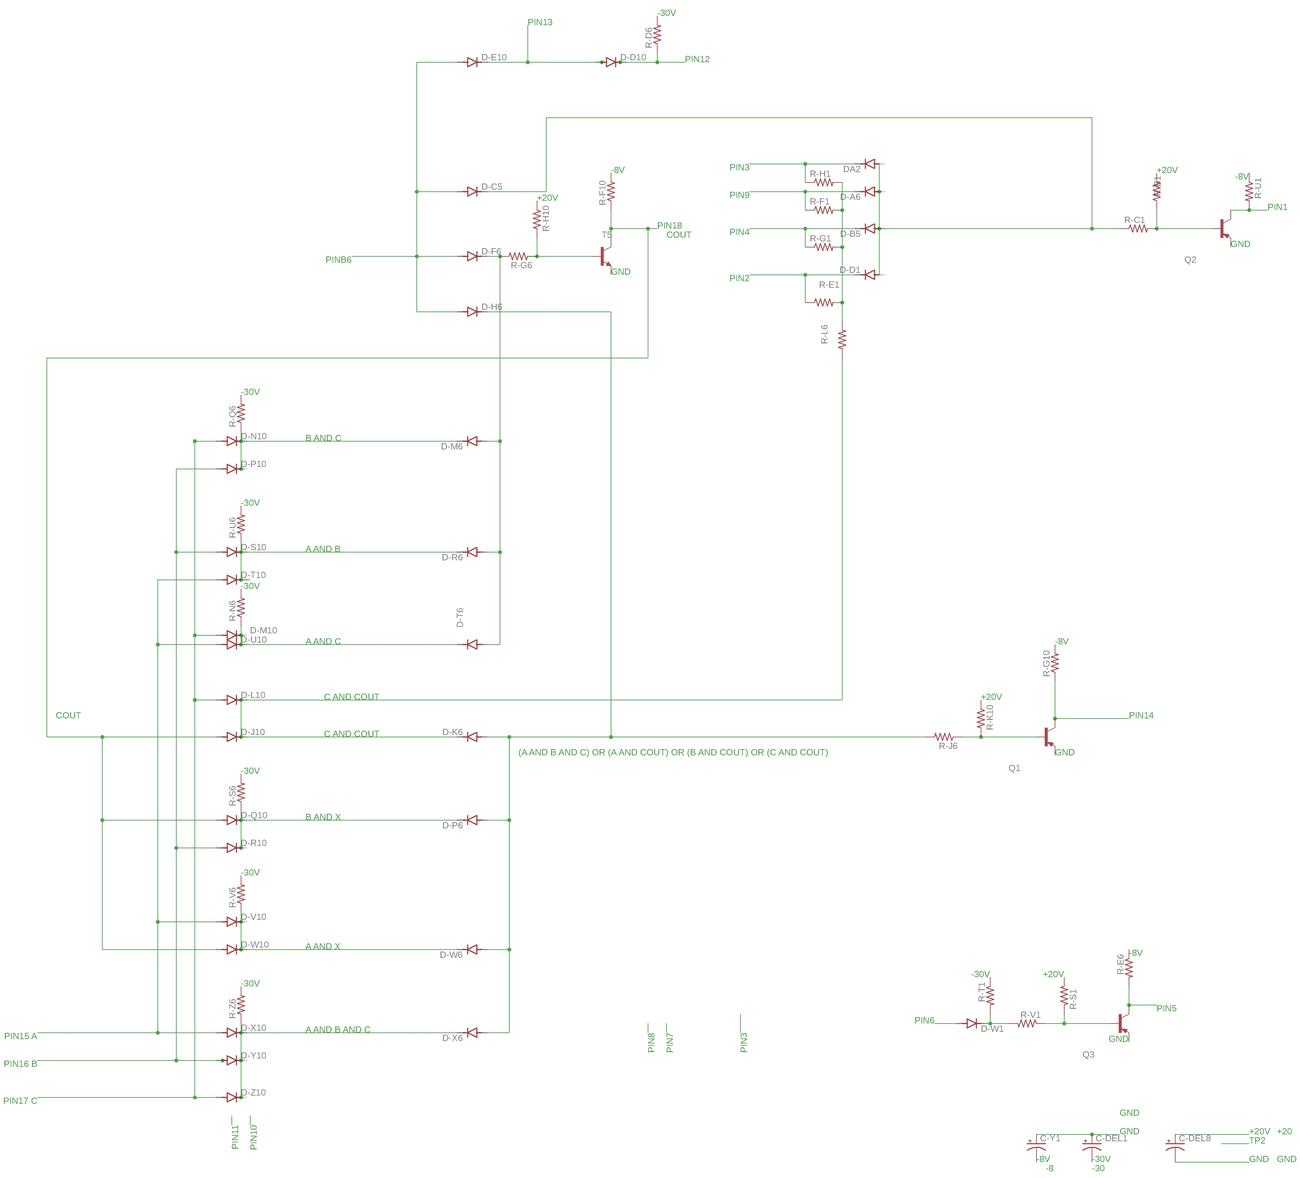 Reverse-engineered schematic of the board. Click for a larger version.